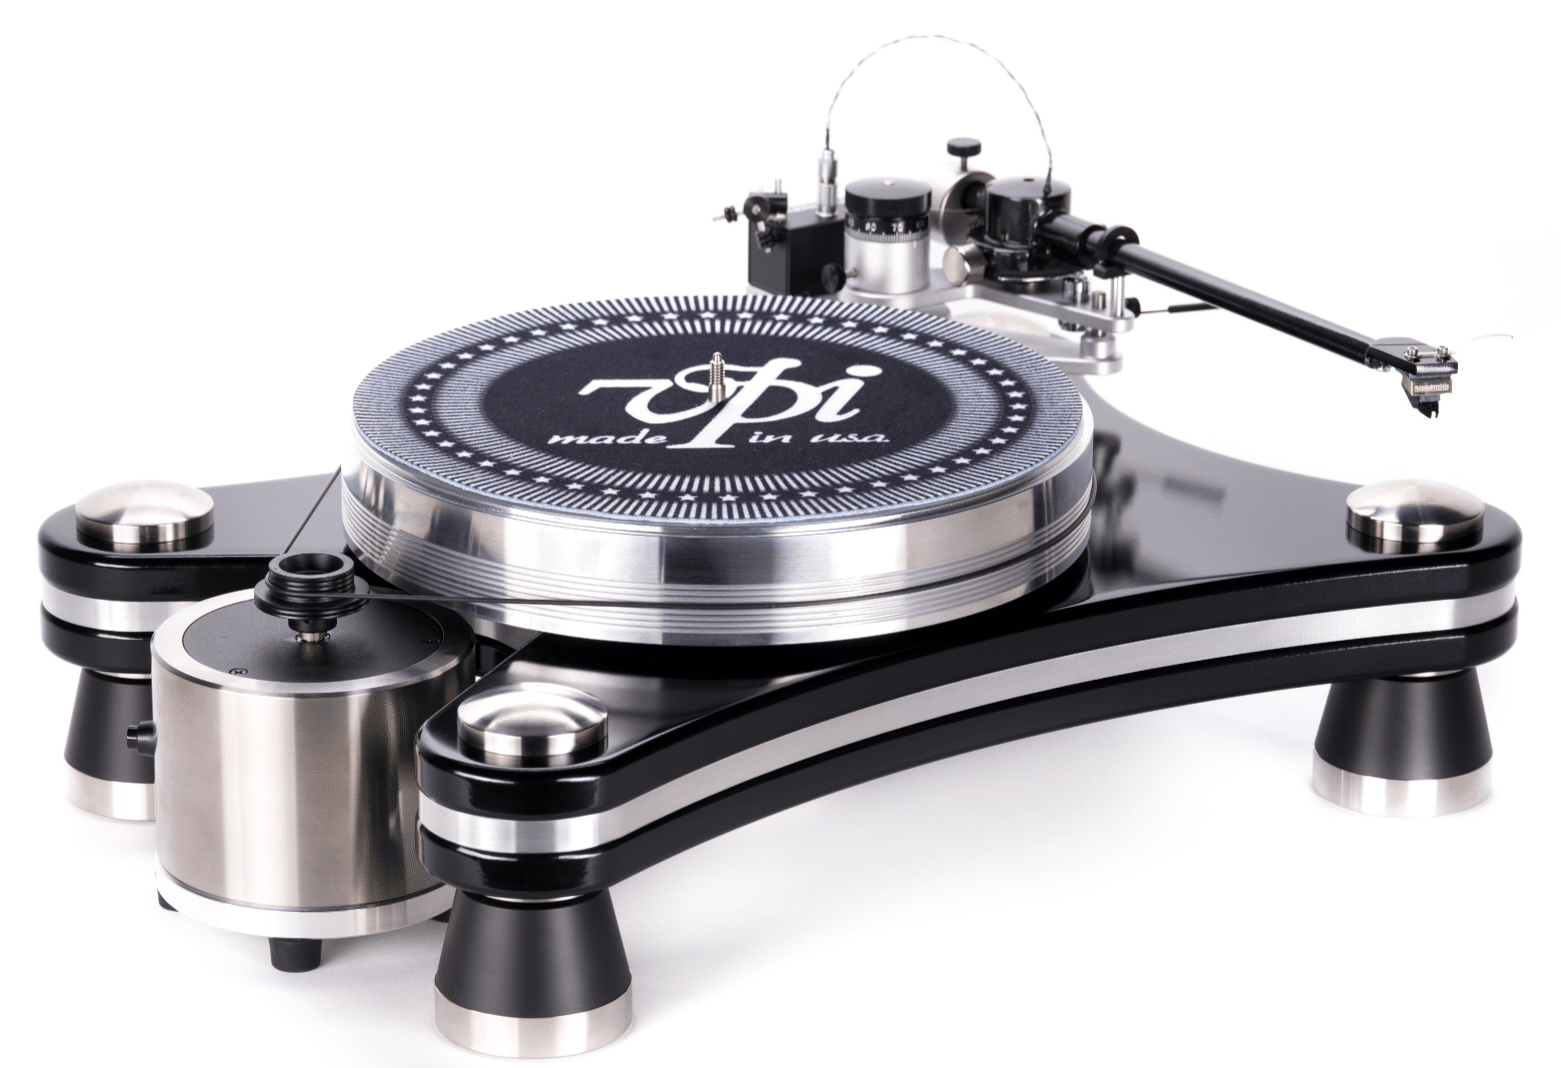 PRIME SIGNATURE TURNTABLE FROM VPI